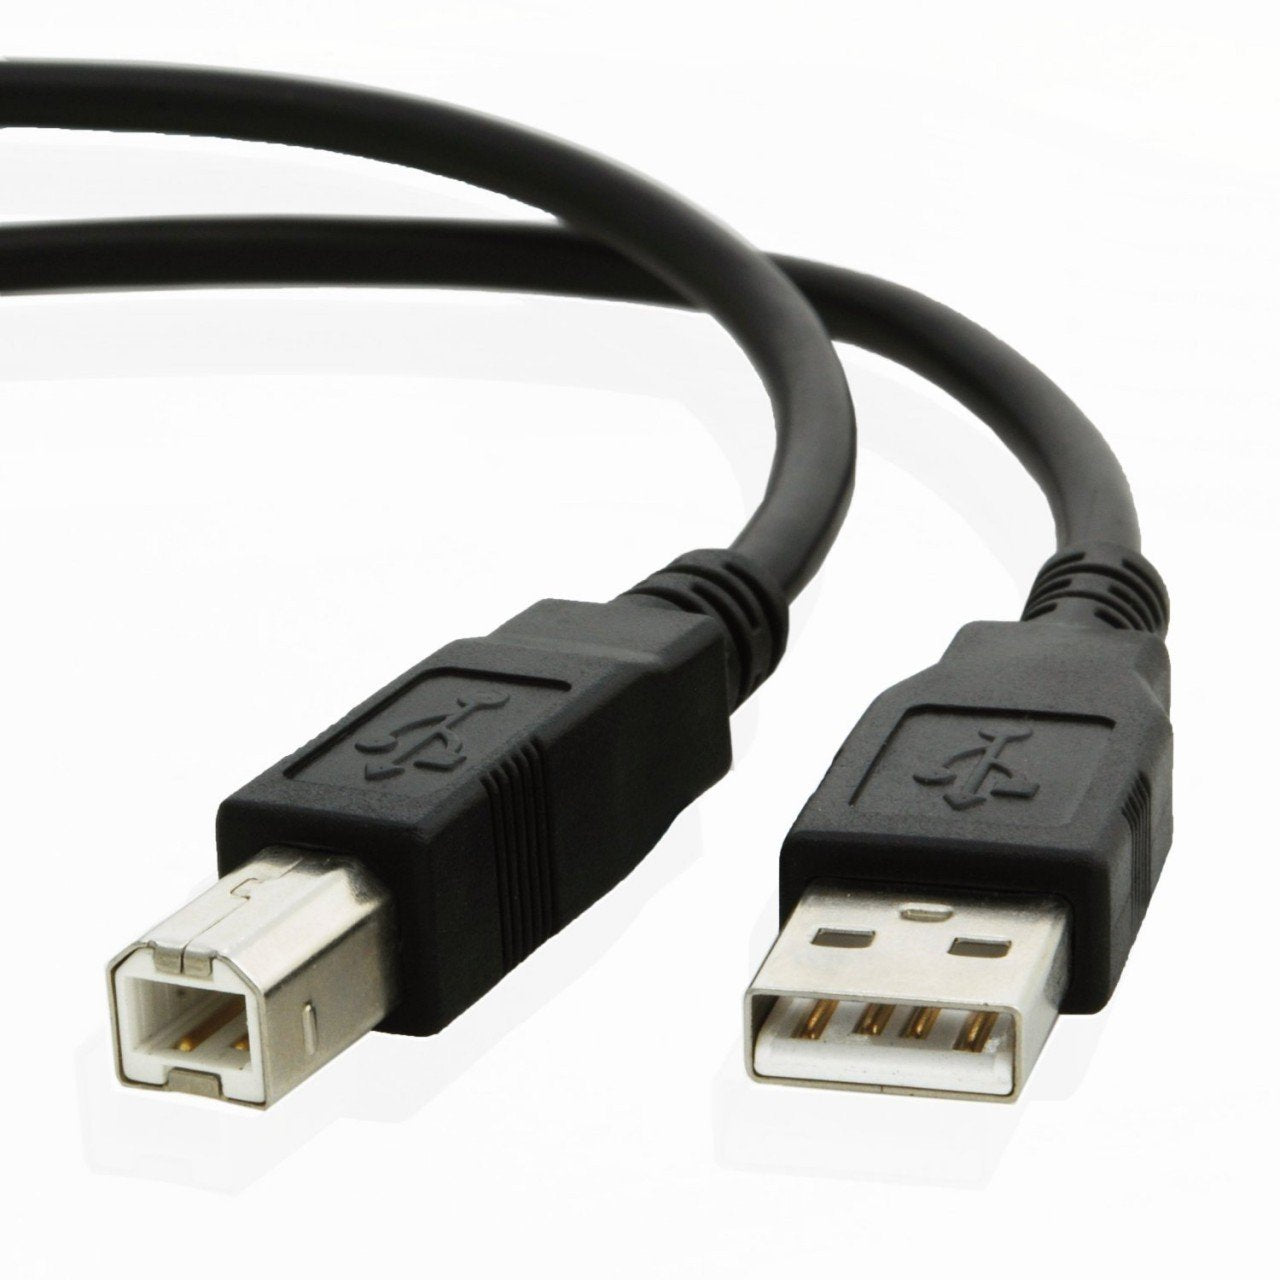 USB cable for Canon PIXMA MG6620